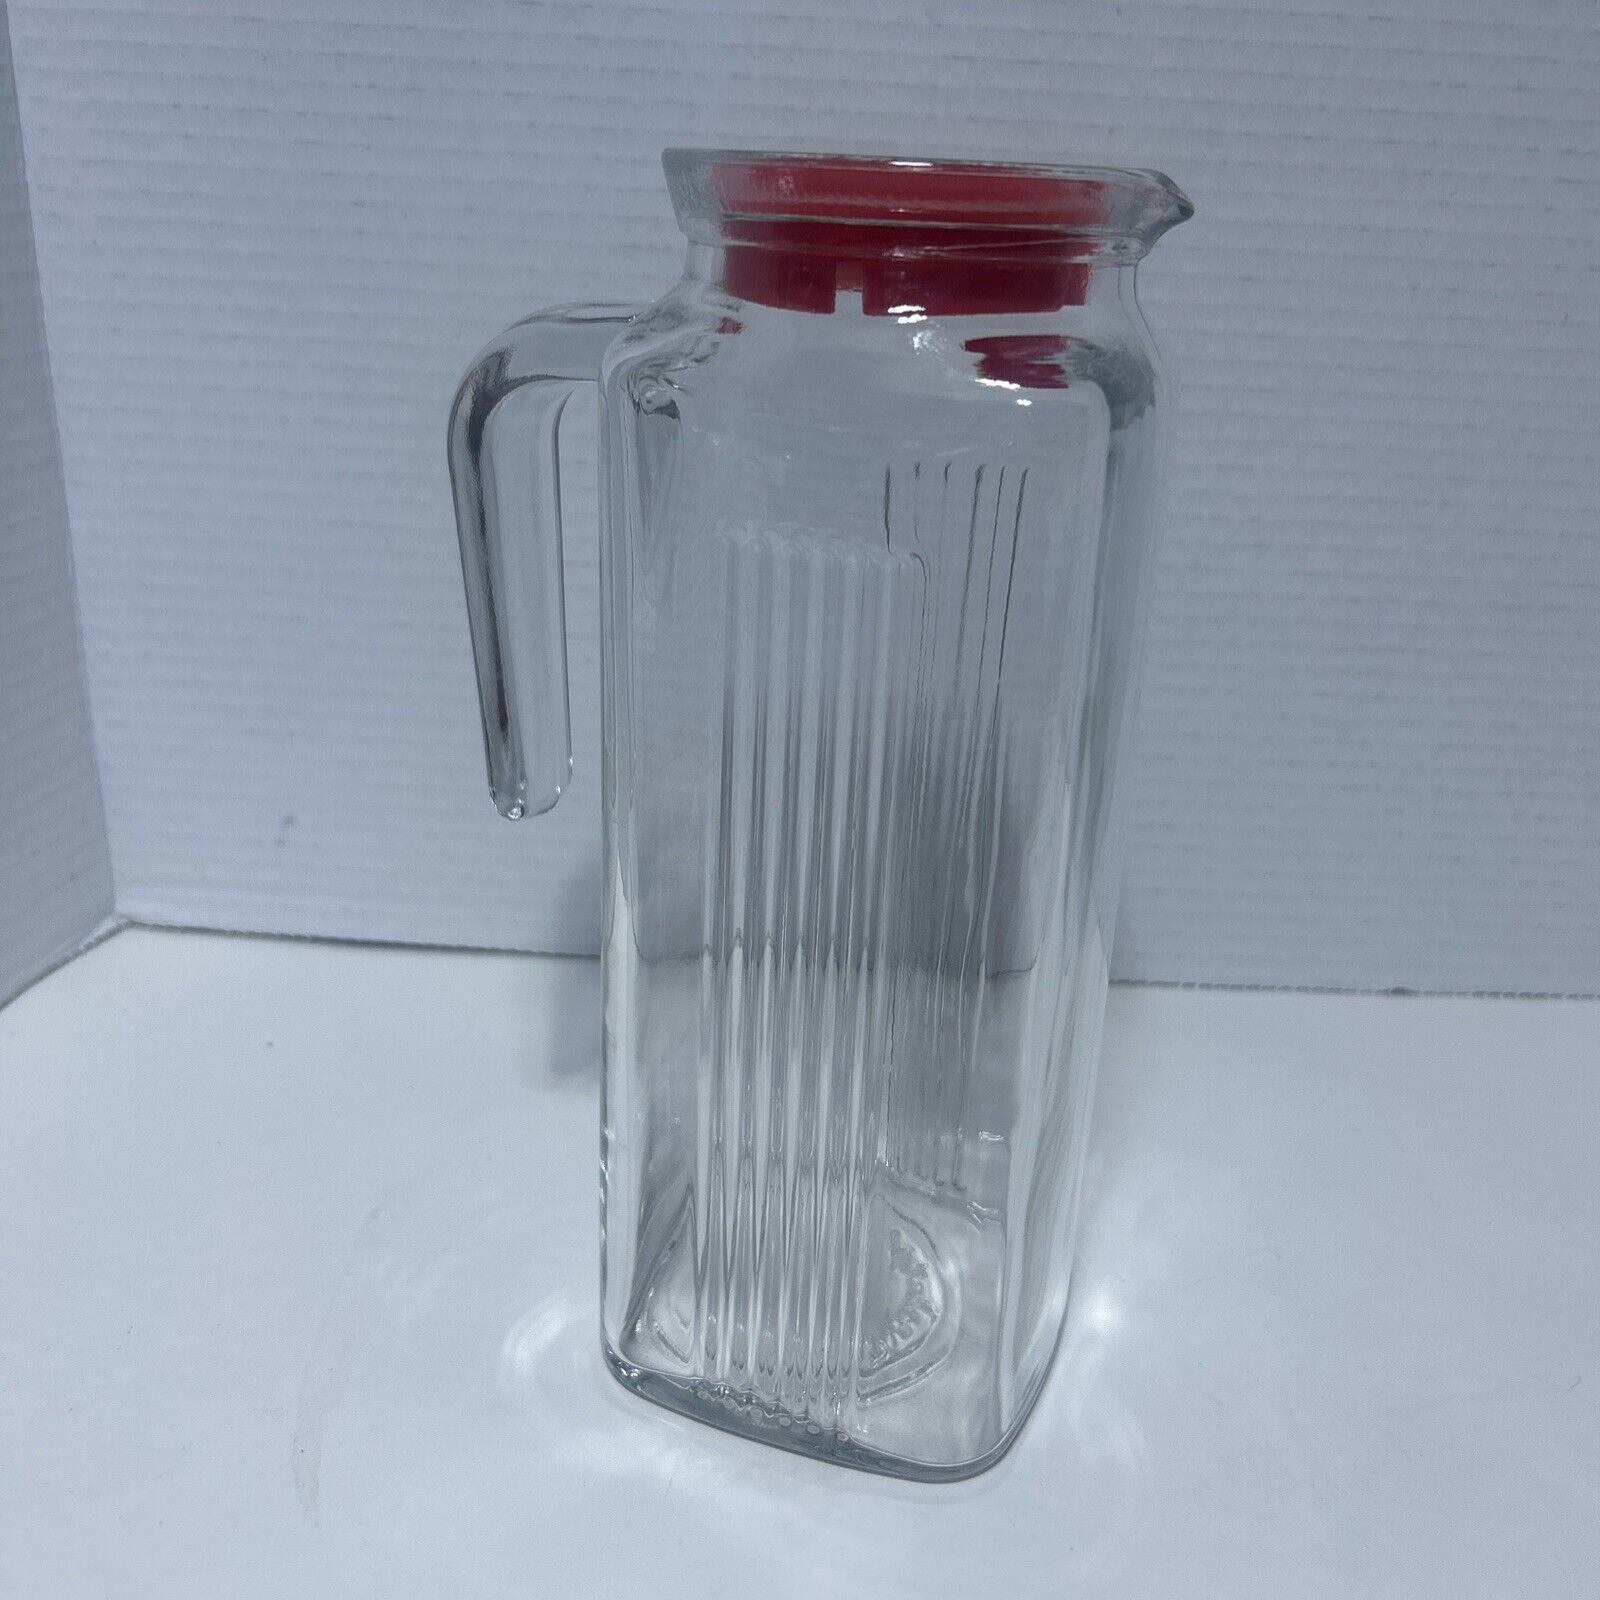 VINTAGE PASABAHCE SQUARE CARAFE PITCHER 9” TALL CLEAR GLASS RED LID MINT COND 